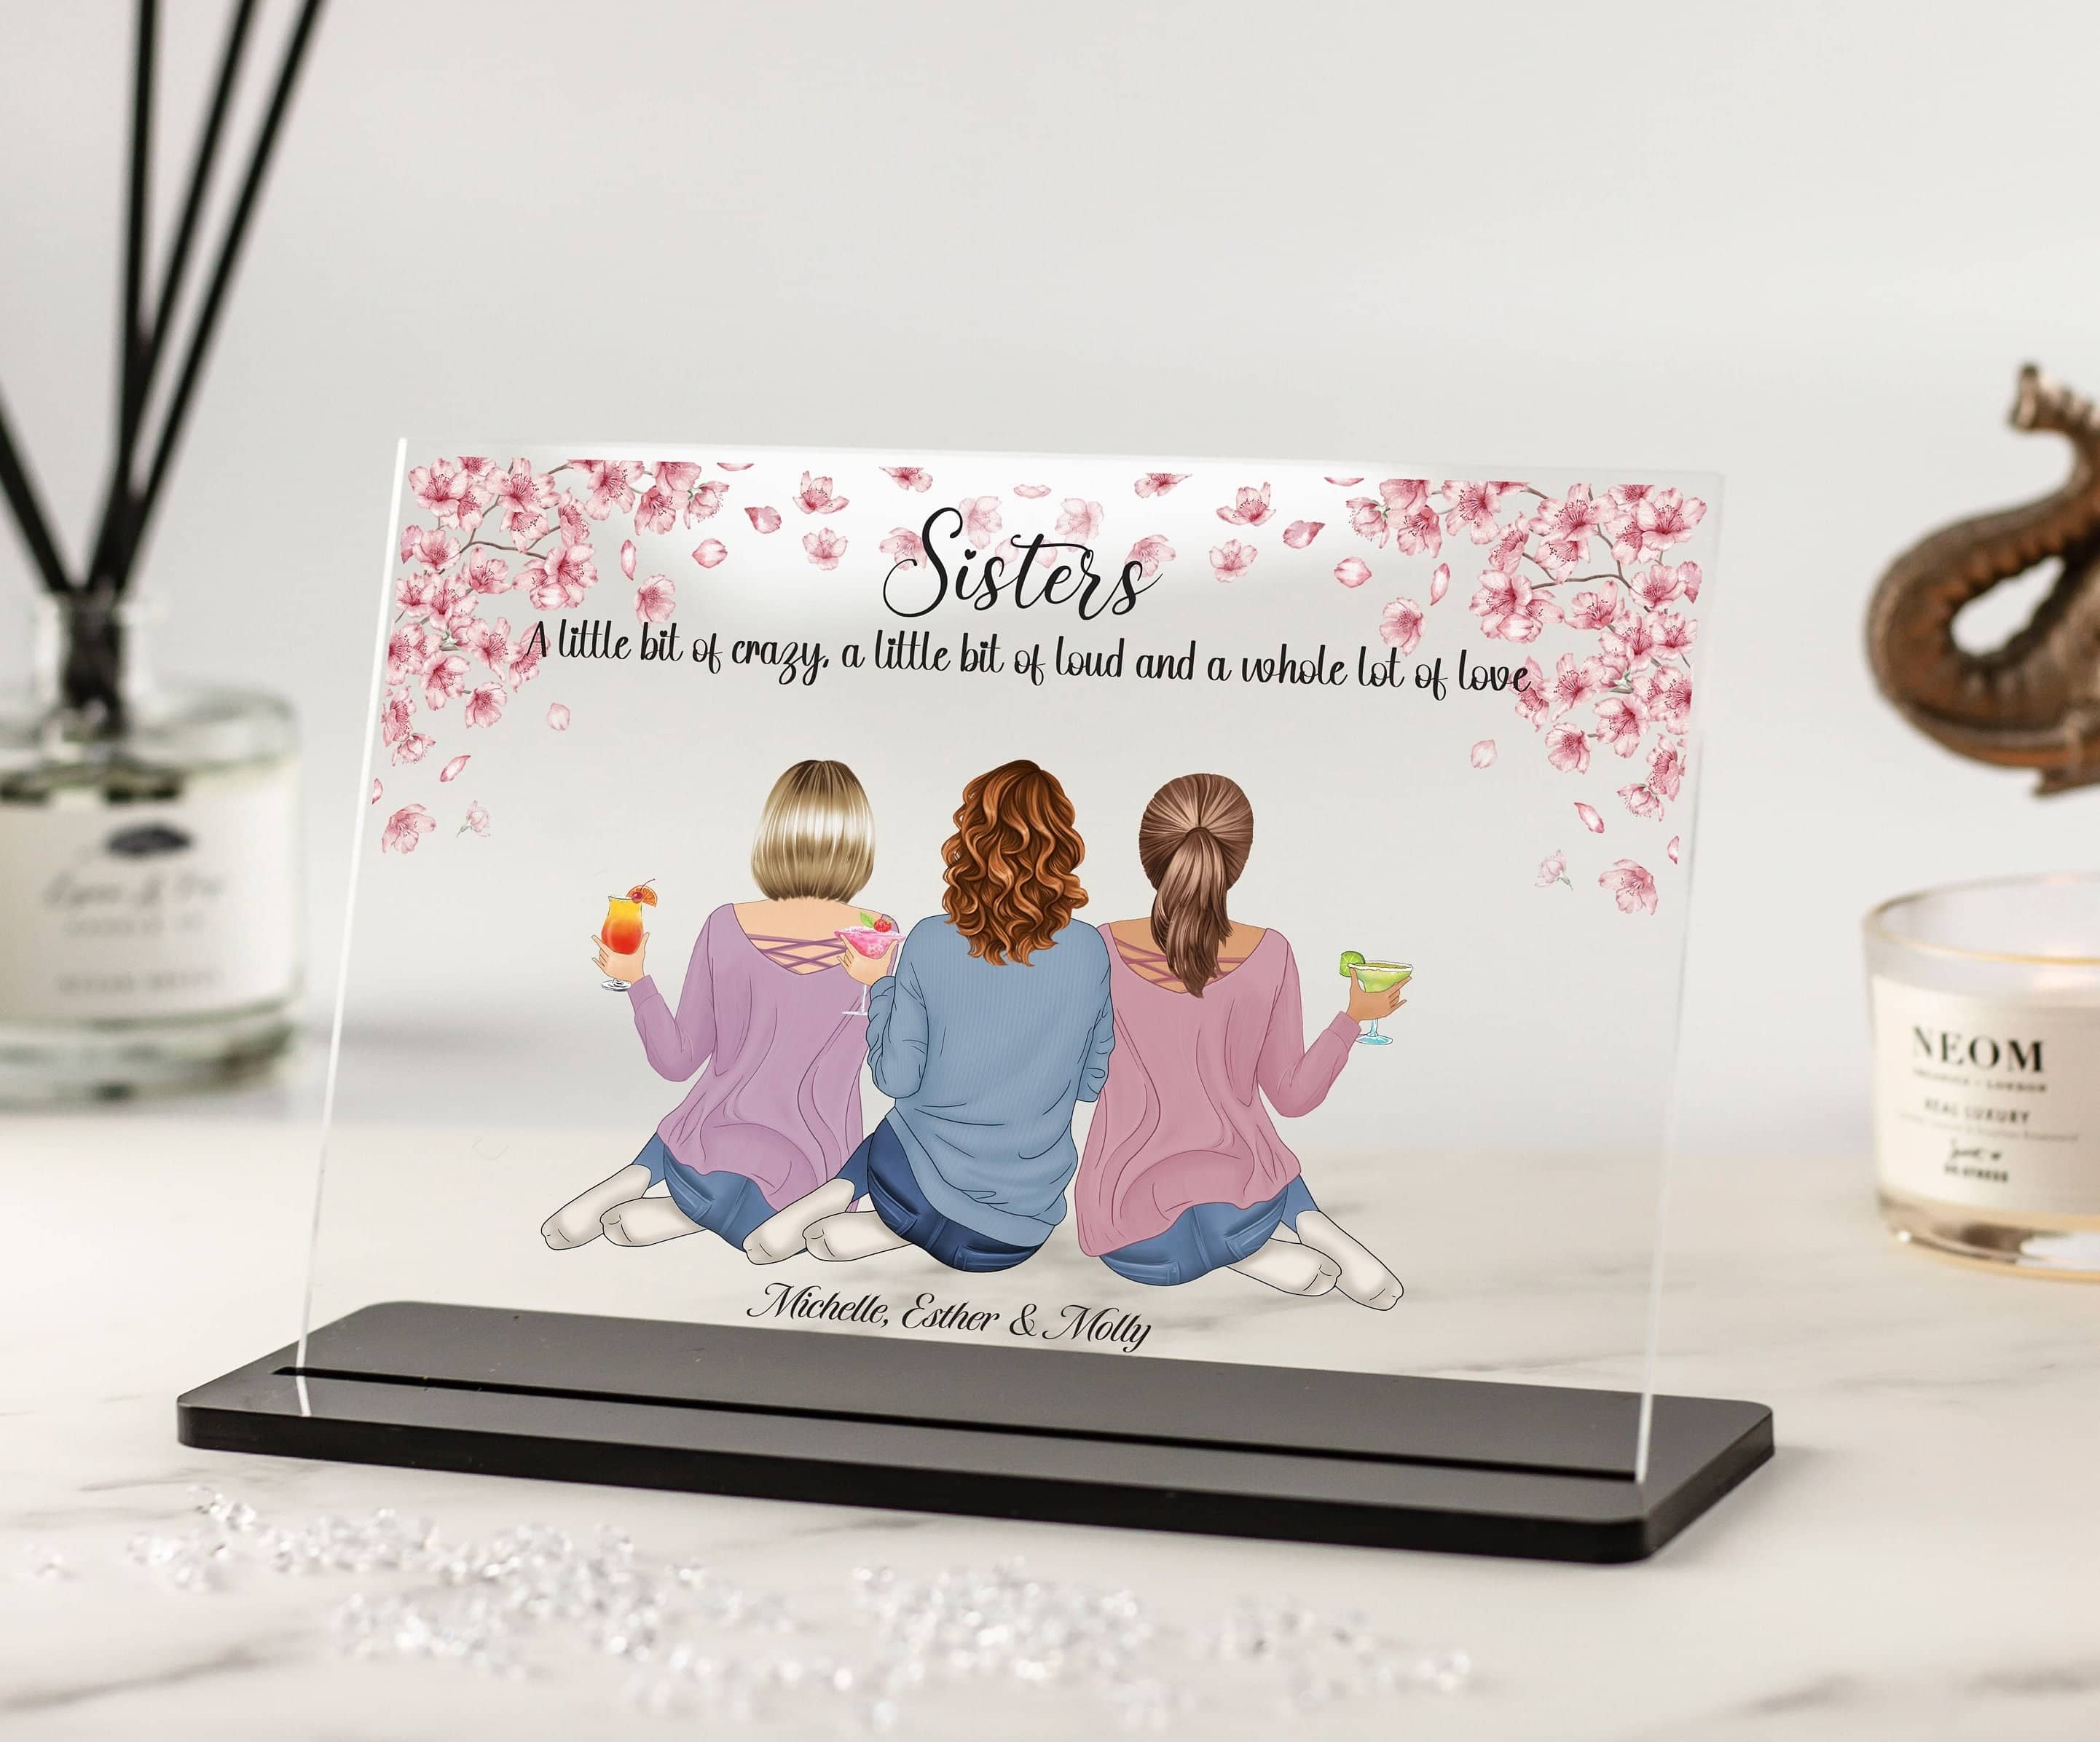 Sister Gifts, Sister Birthday, Christmas Gifts, Sisters Gifts from Sister,Unique Gift, Sister Print Personalised Gifts Floral Acrylic Plaque